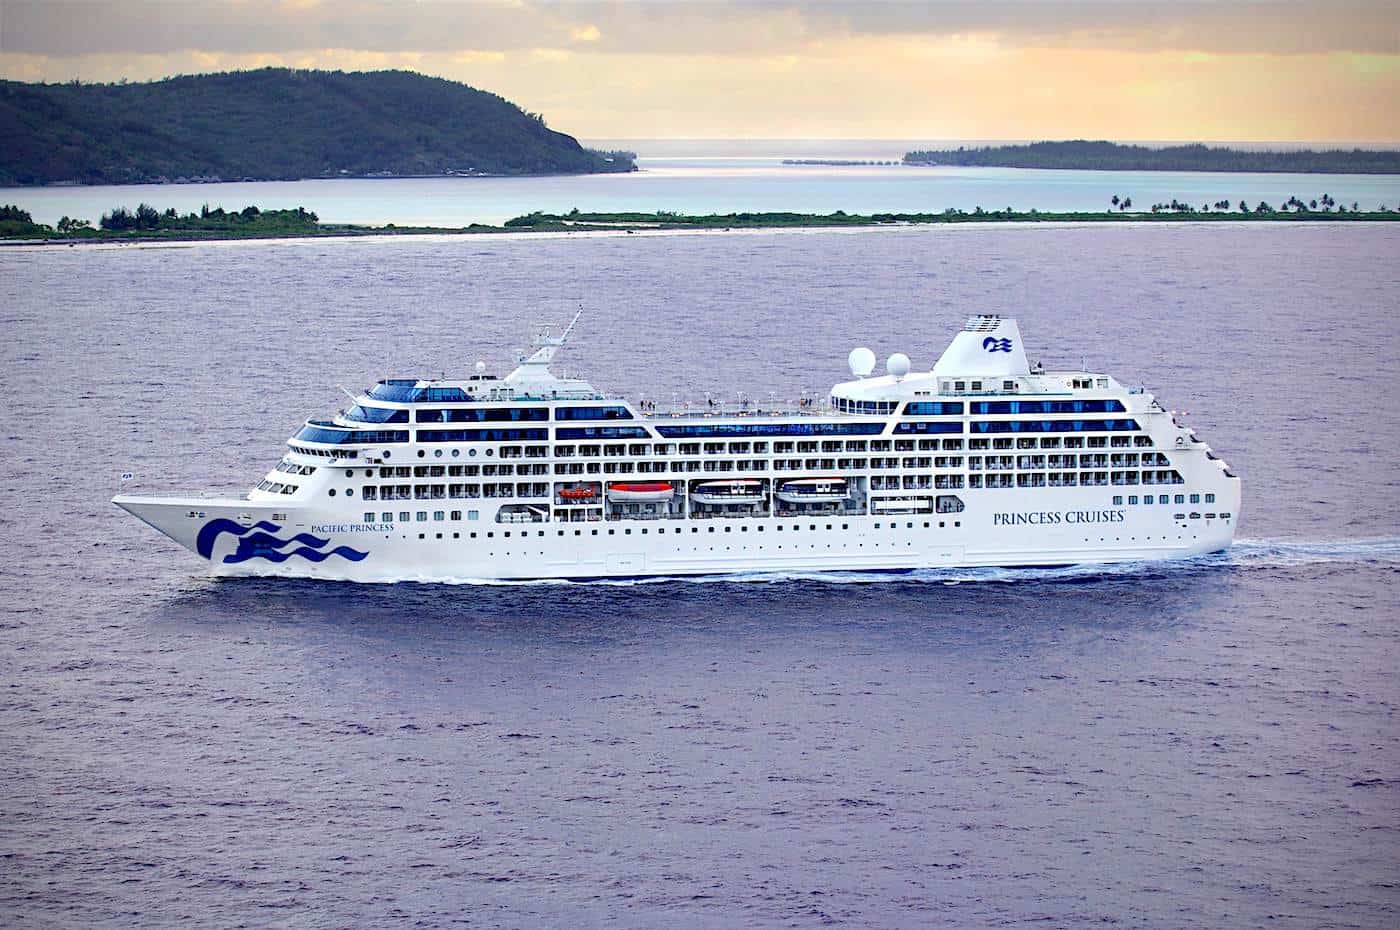 Princess Cruises' Pacific Princess in the South Pacific